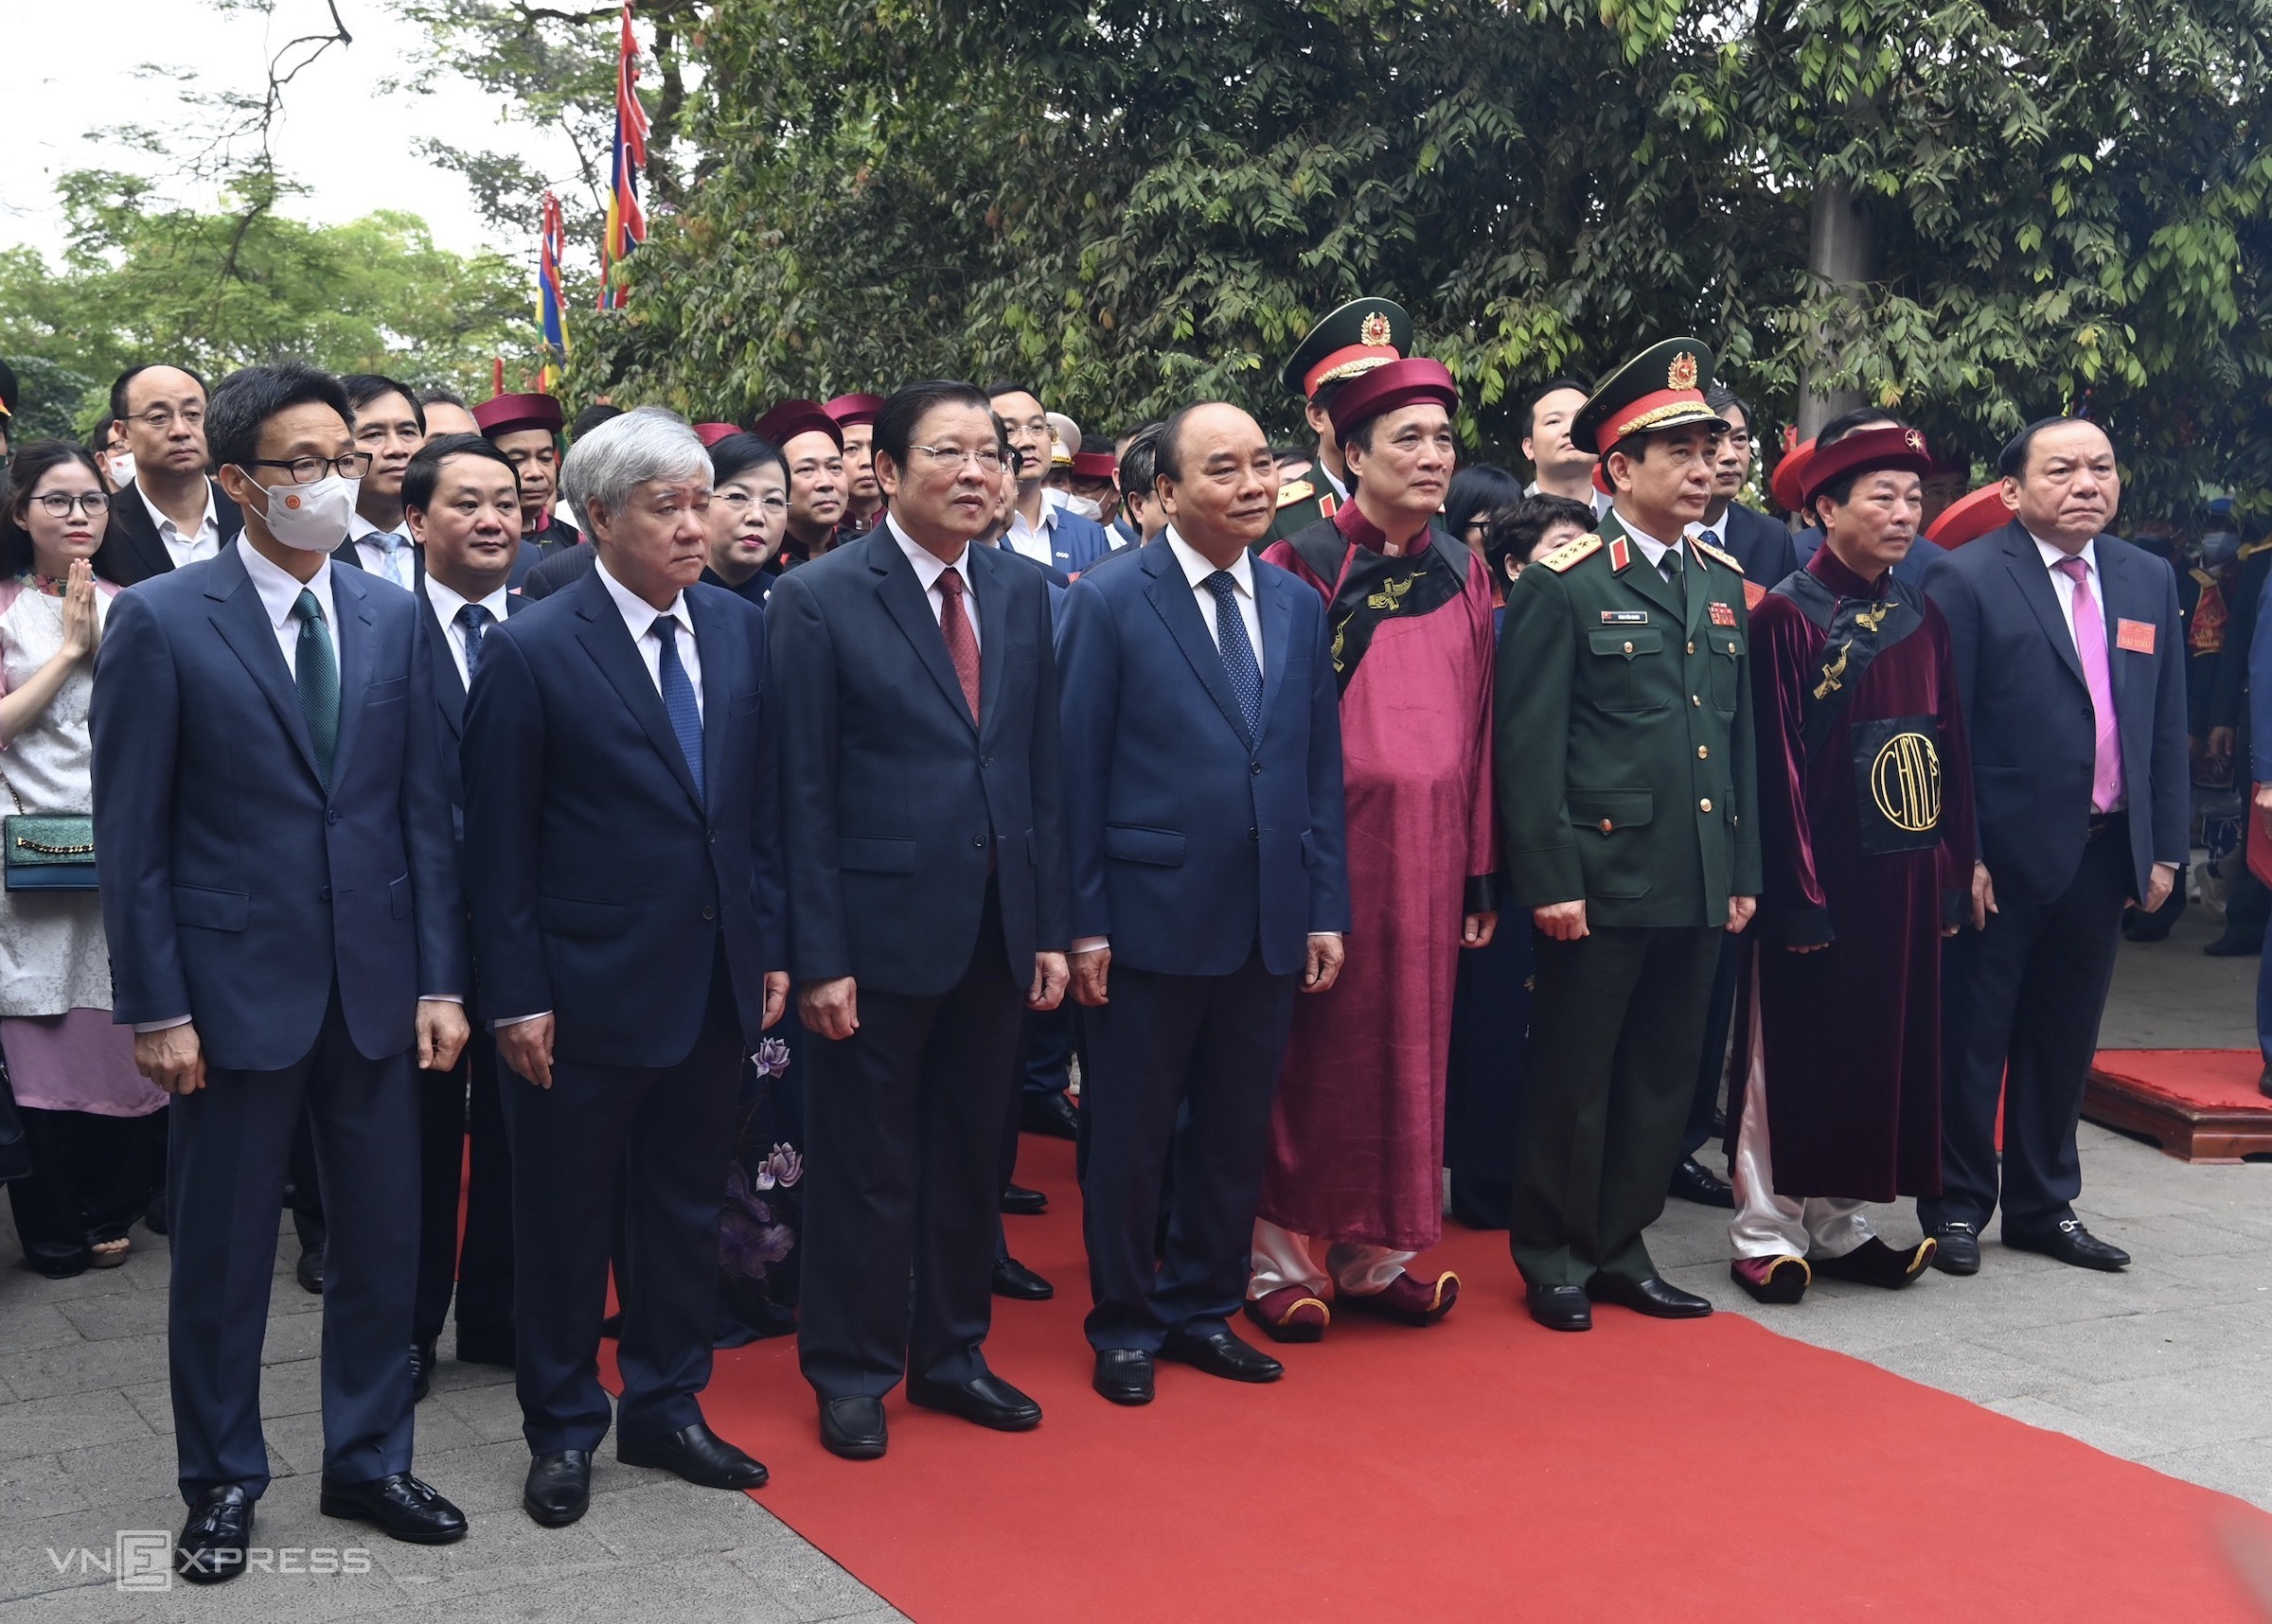 A delegation of Party and State leaders led by President Nguyen Xuan Phuc (center) joined the ceremony at the temple Sunday morning.